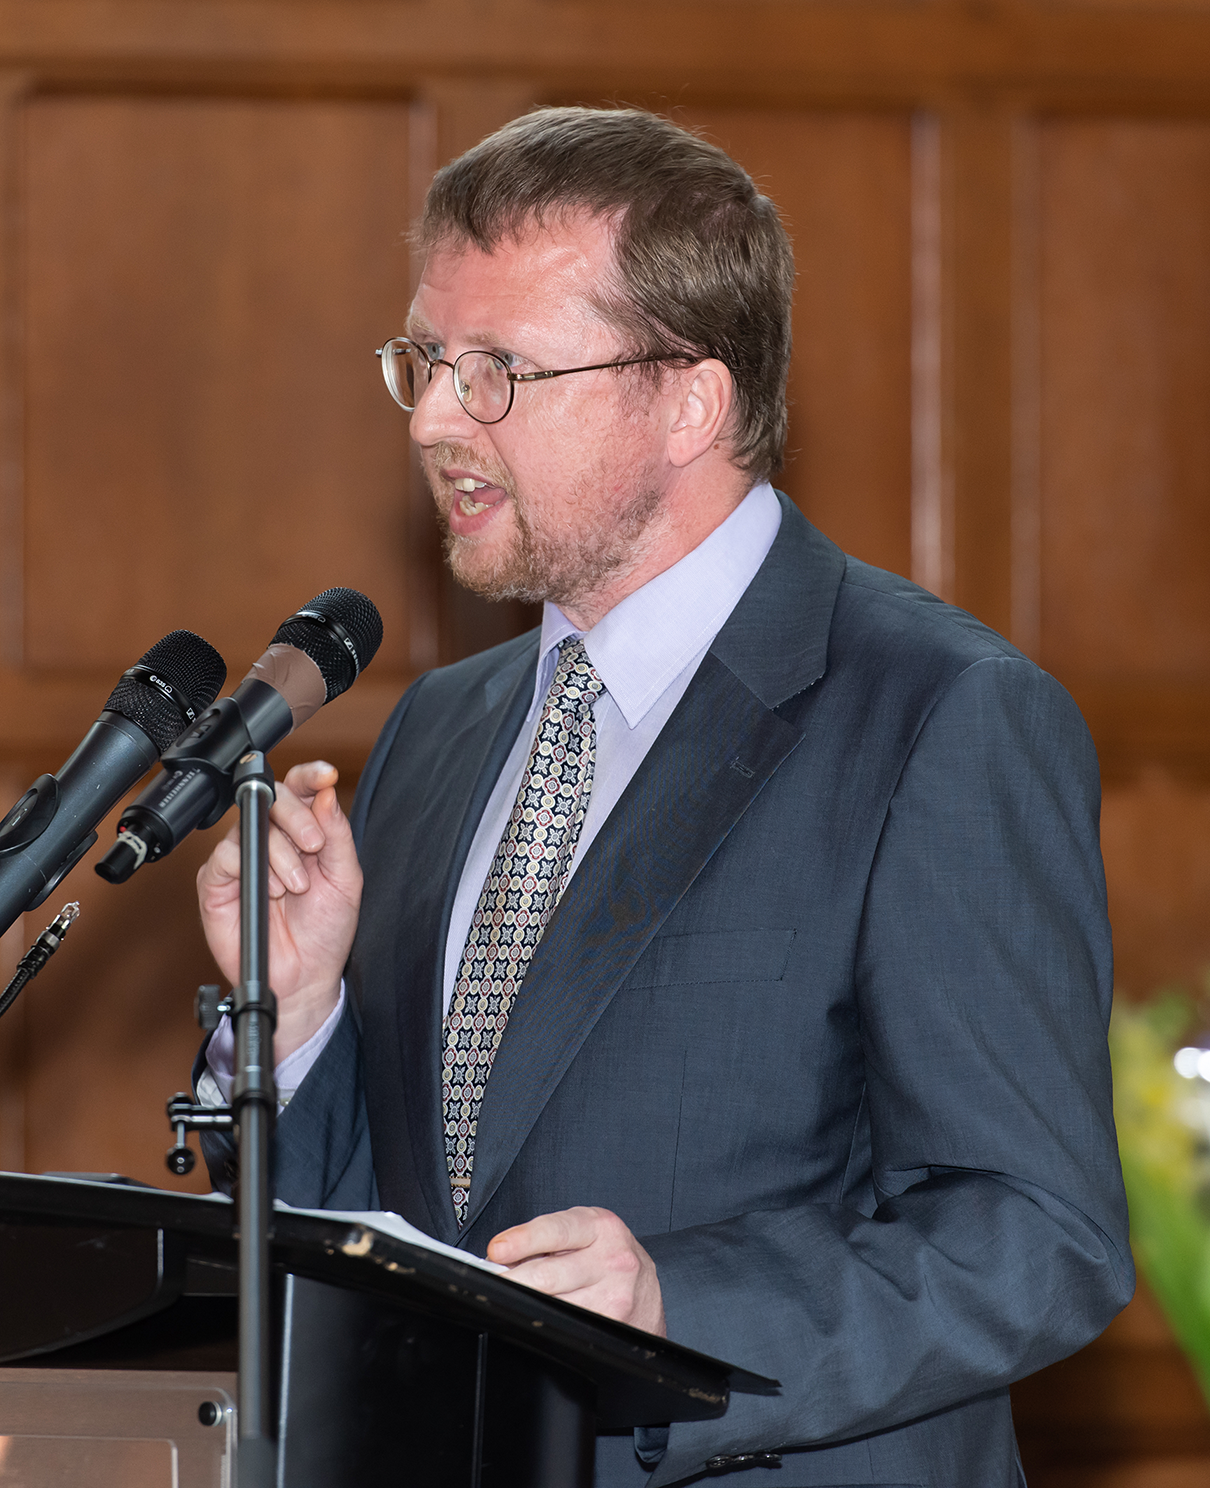 Dr. Paul Thistle delivers speech on global health